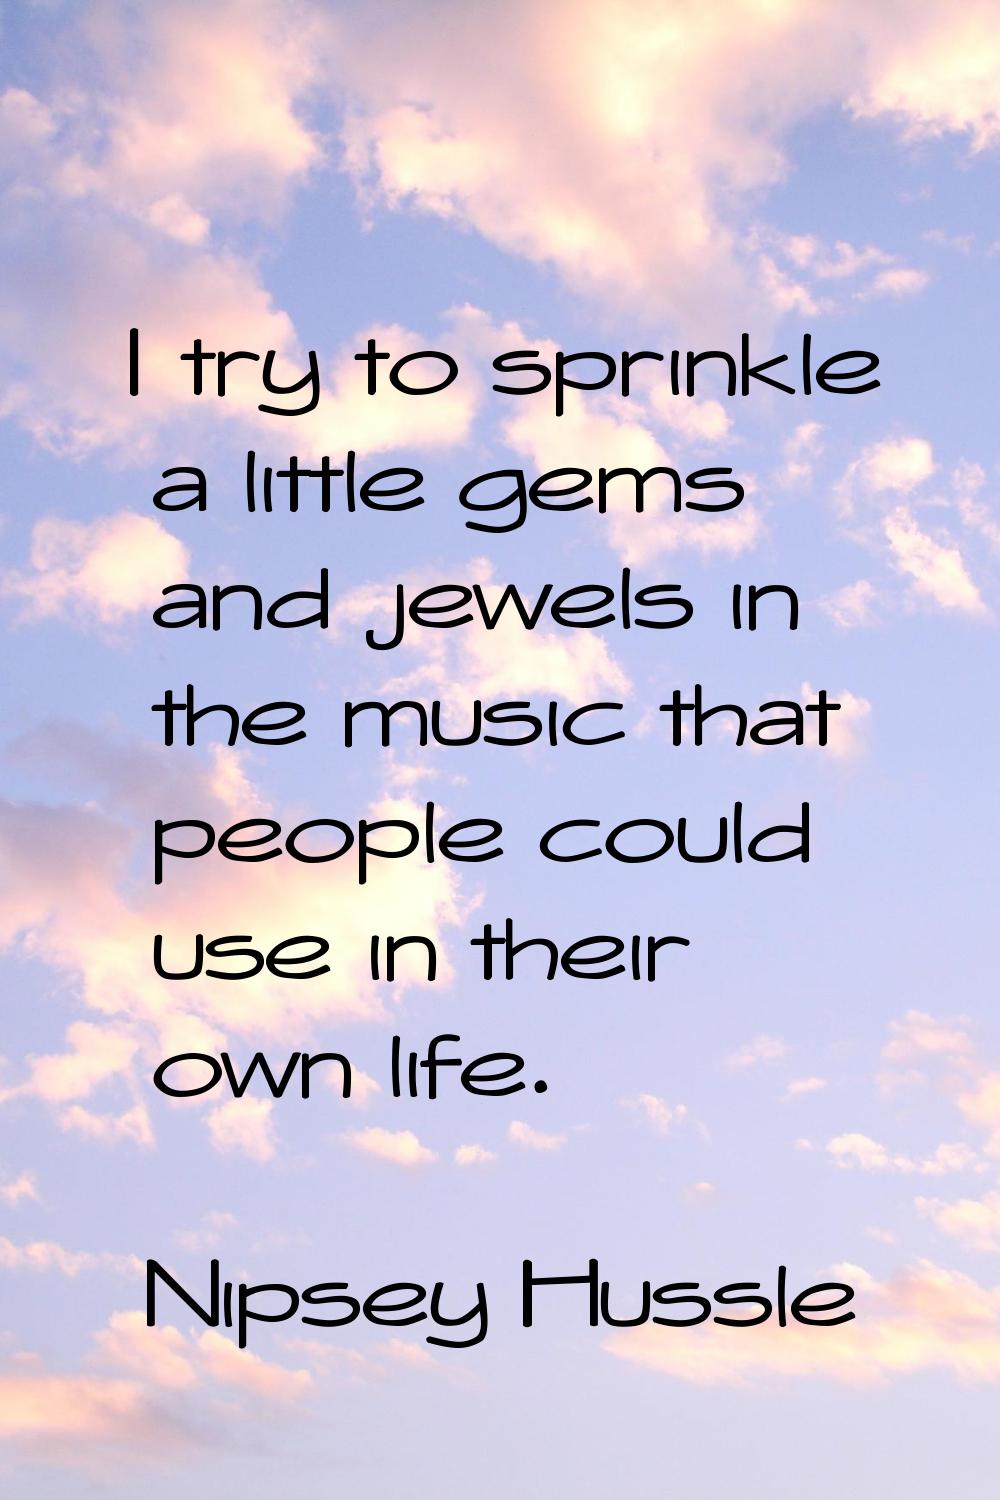 I try to sprinkle a little gems and jewels in the music that people could use in their own life.